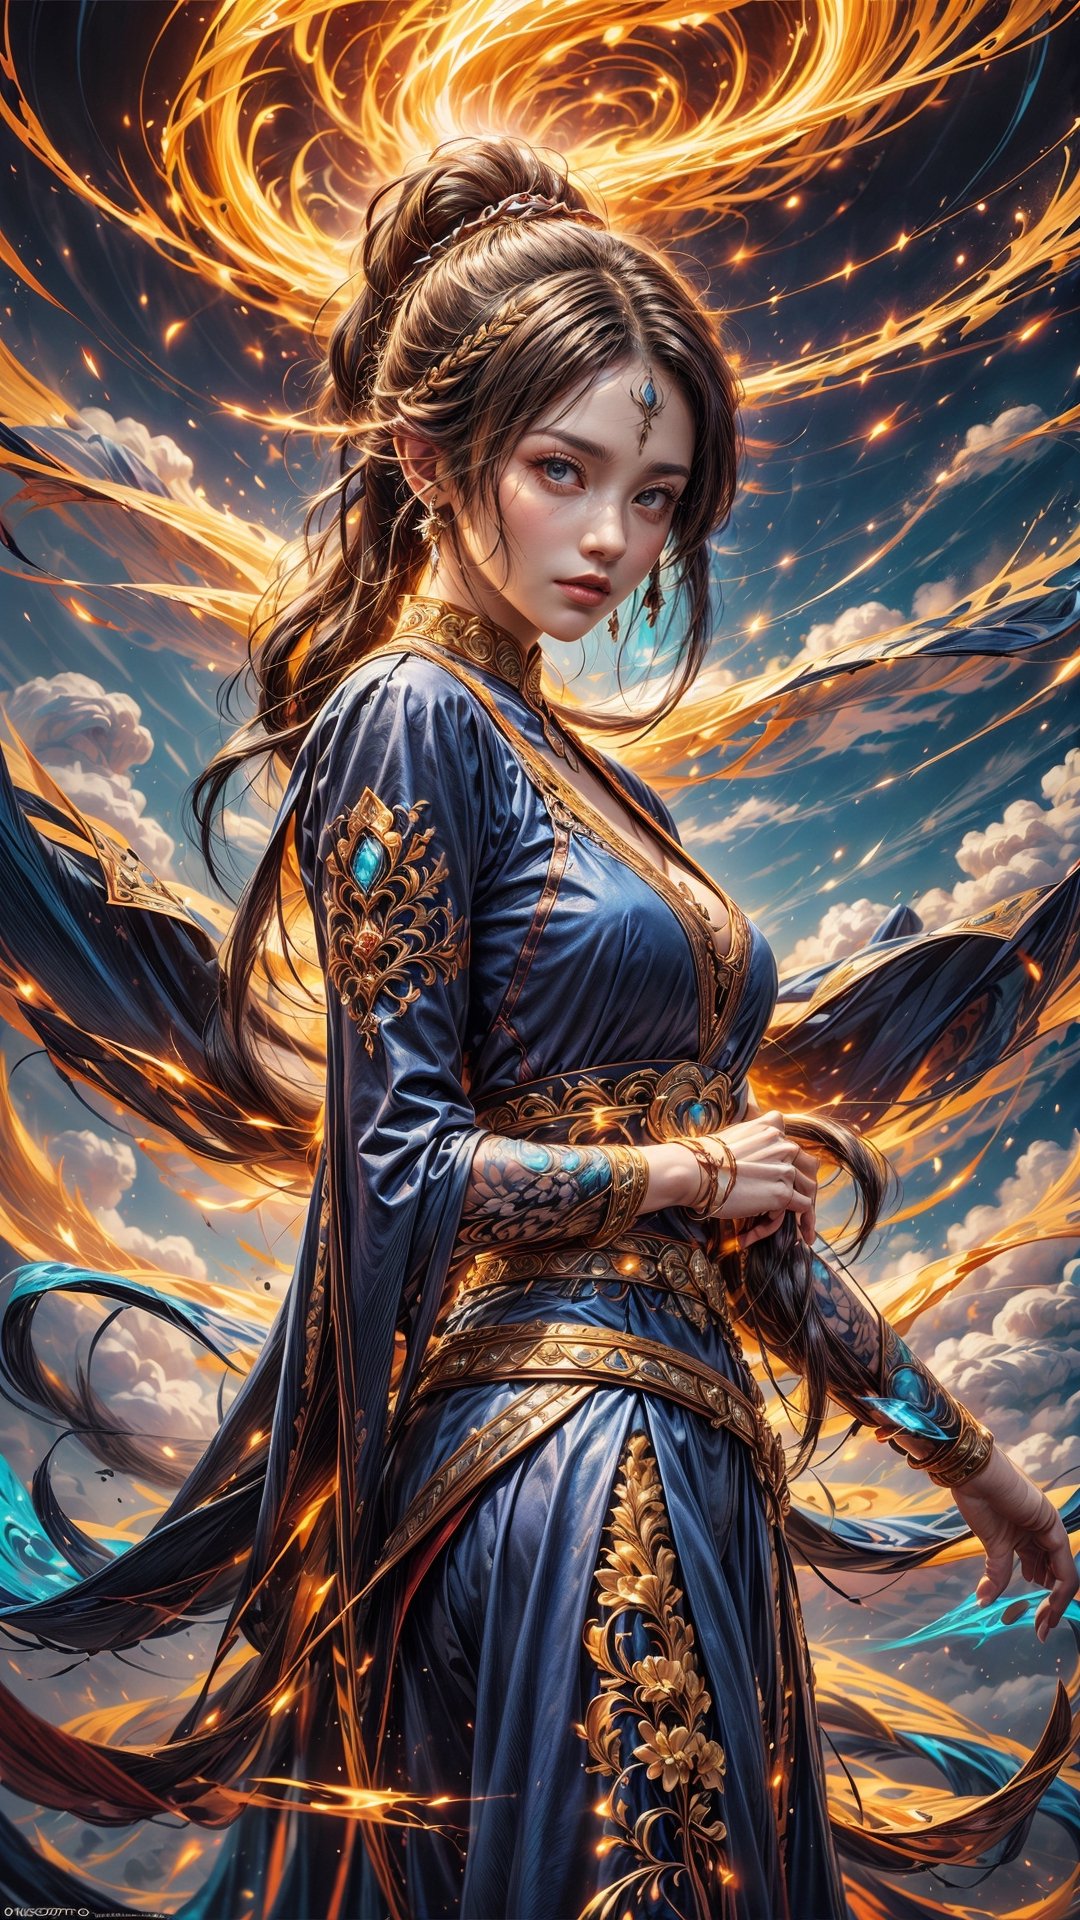 (4k), (masterpiece), (best quality), (extremely intricate), (realistic), (sharp focus), (award winning), (cinematic lighting), (extremely detailed), (epic),

A close-up portrait of Avatar Korra, the Avatar of all four elements, standing with her arms crossed and a determined look on her face. She is wearing her blue water tribe attire and her hair is tied back in a ponytail. The background is a swirling vortex of all four elements.

,korra,DonMDj1nnM4g1cXL ,YakuzaTattoo,huoshen